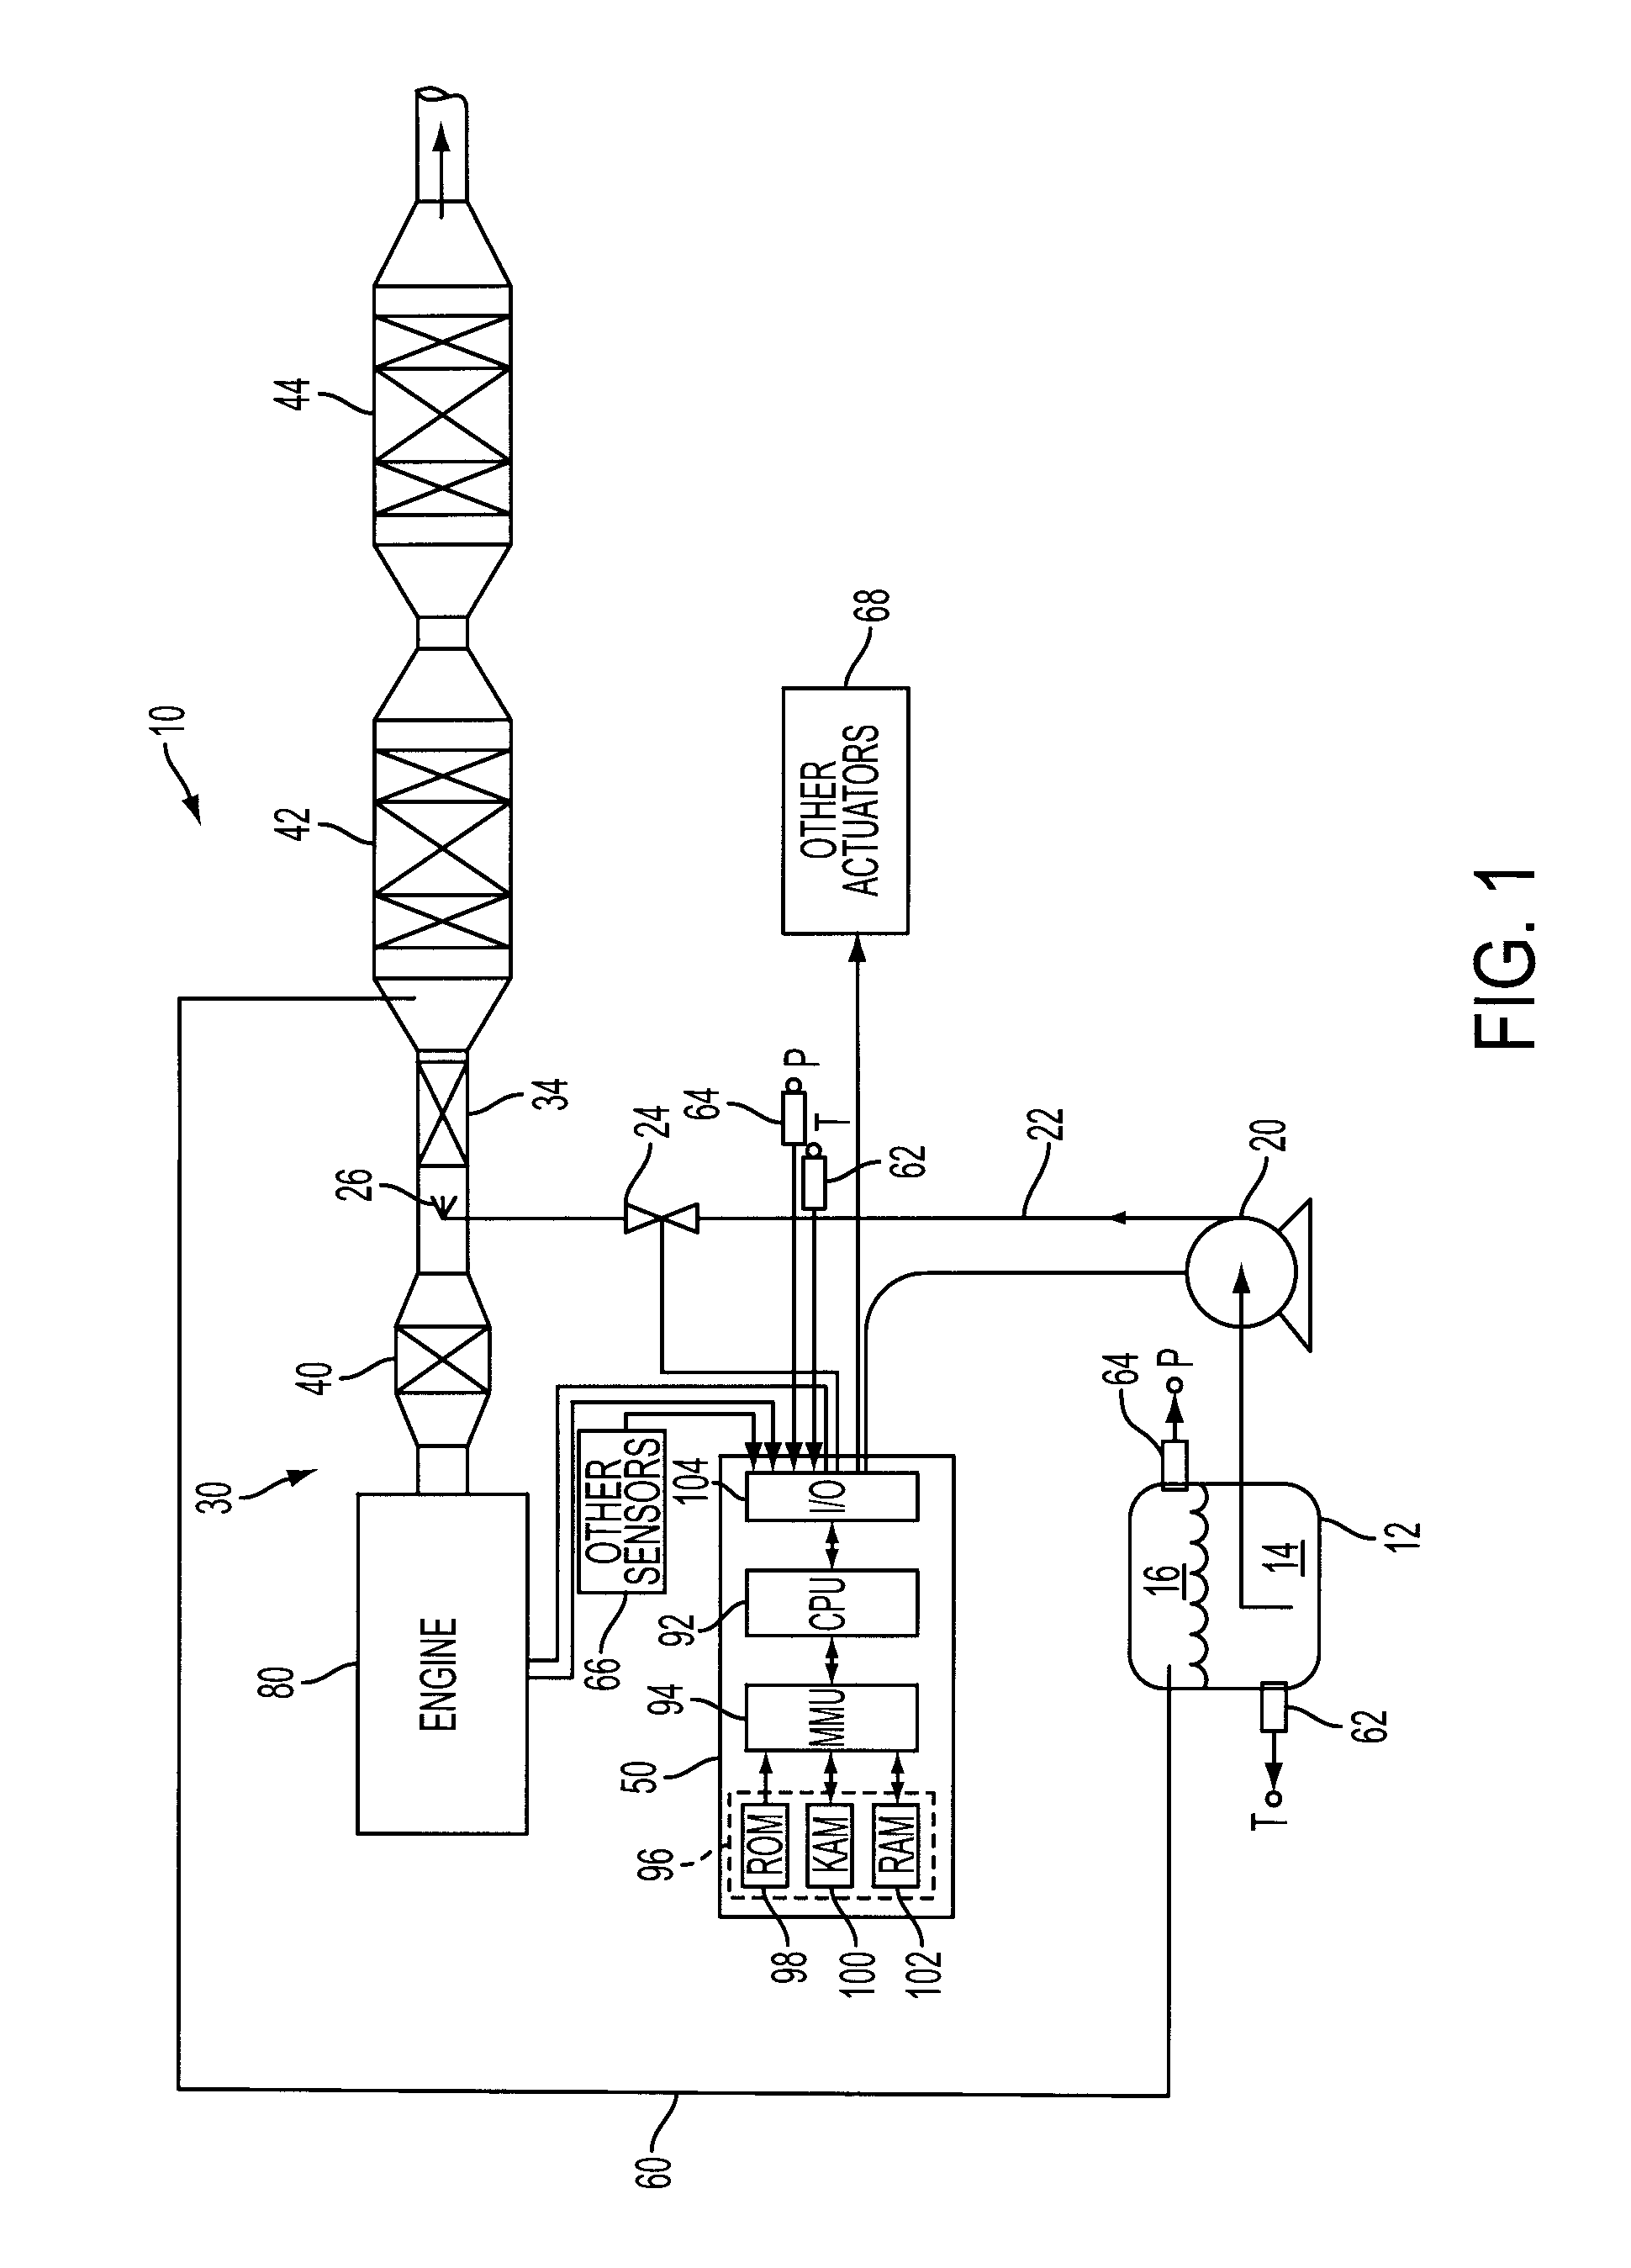 Venting of on-board vehicle emissions treatment system with pressure assist